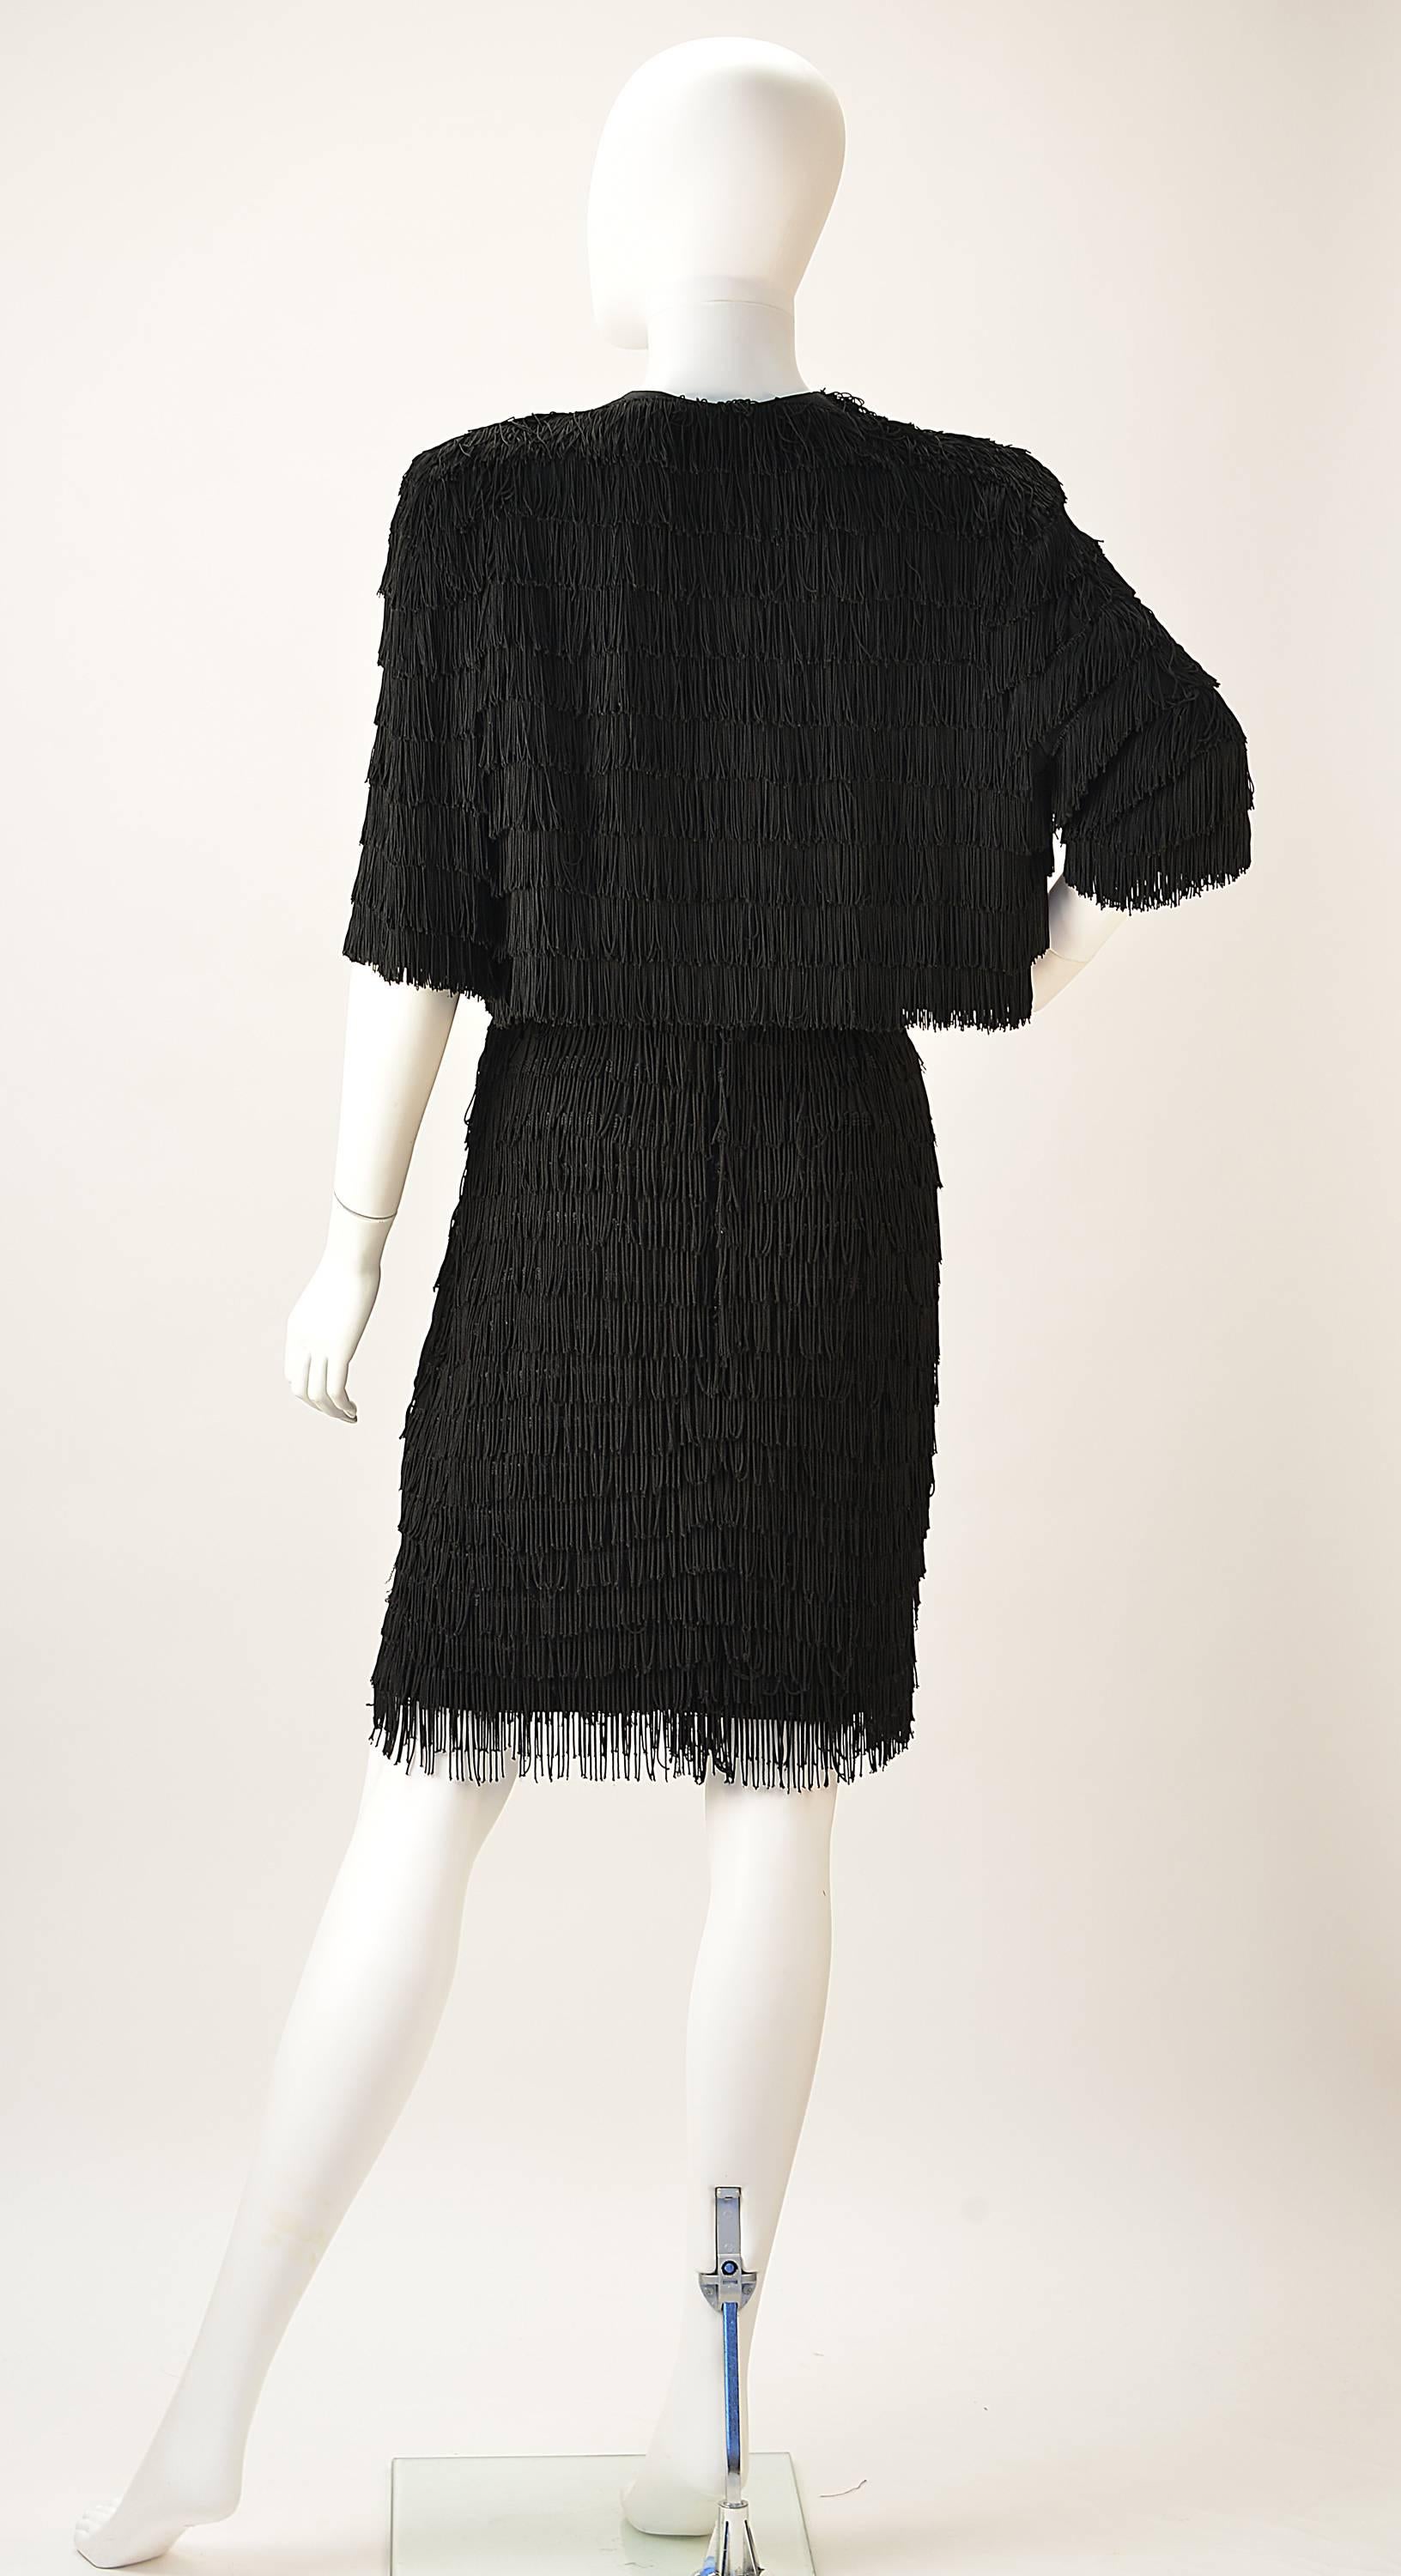 1950s Black Fringe Dress with Matching Fringe Bolero In Excellent Condition For Sale In Houston, TX